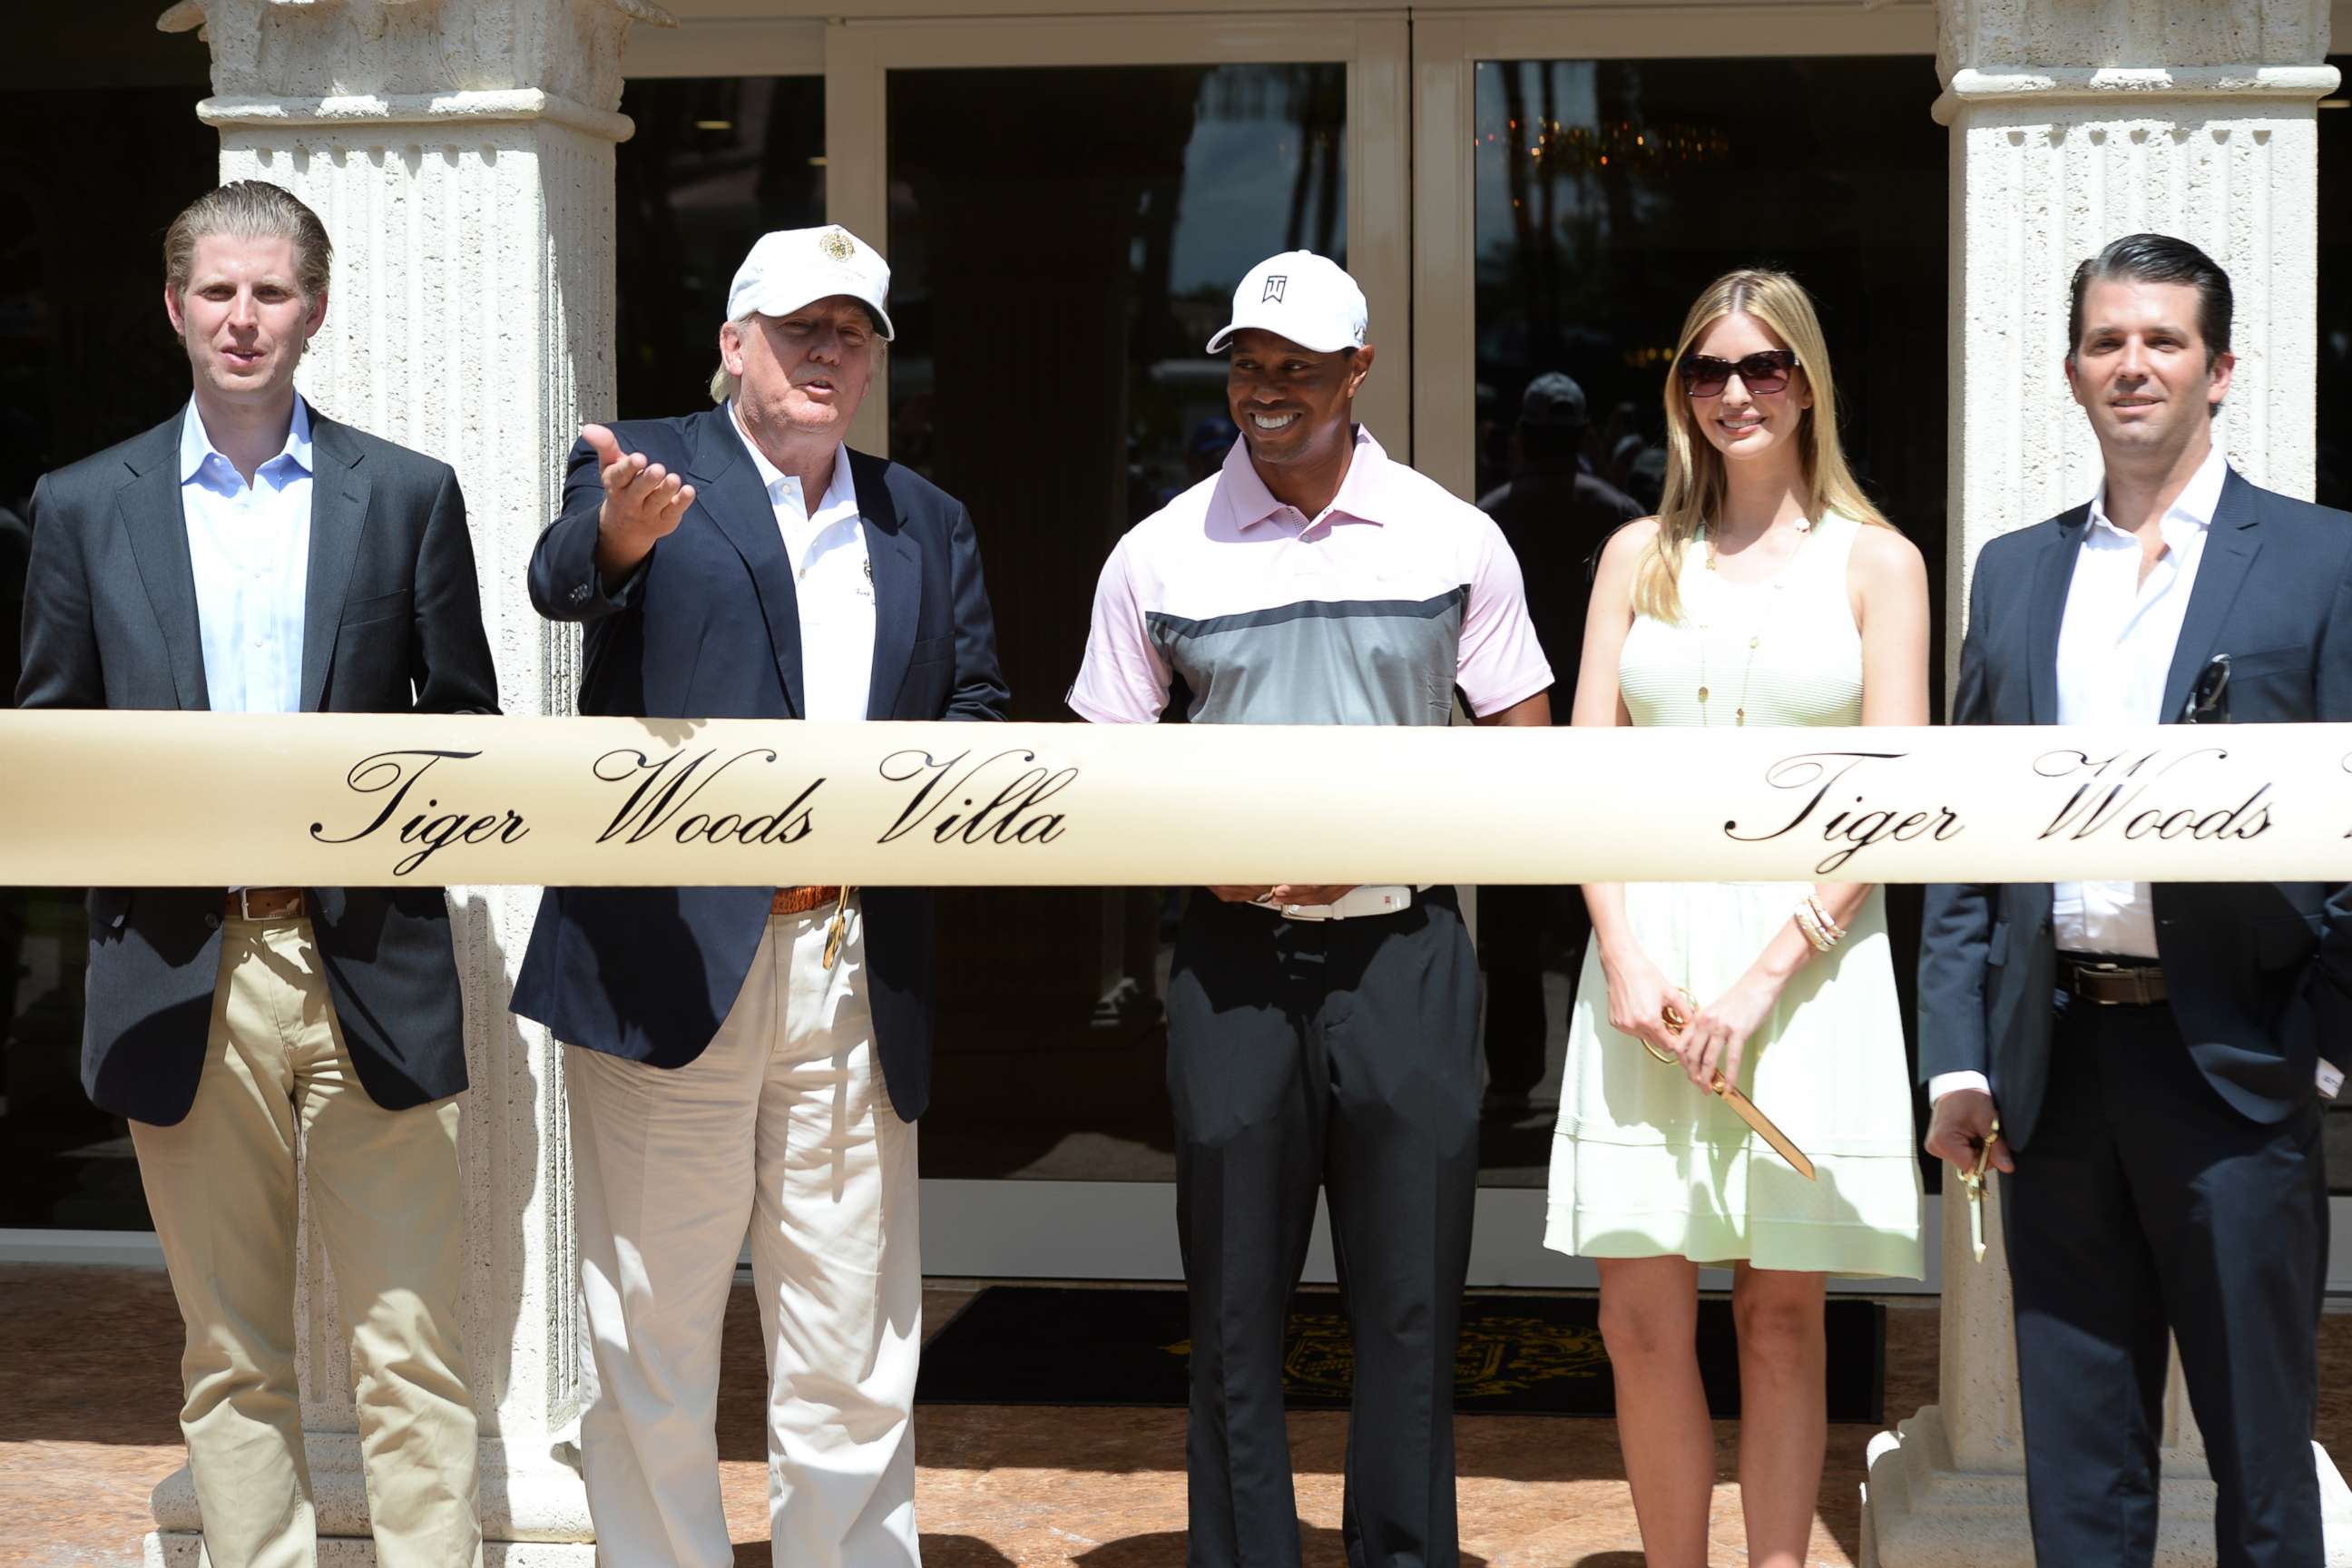 PHOTO: Eric Trump, Donald Trump, Tiger Woods, Ivanka Trump and Donald Trump Jr. at the Tiger Woods Villa prior to the start of the World Golf Championships-Cadillac Championship at Trump National Doral on March 5, 2014 in Doral, Florida. 